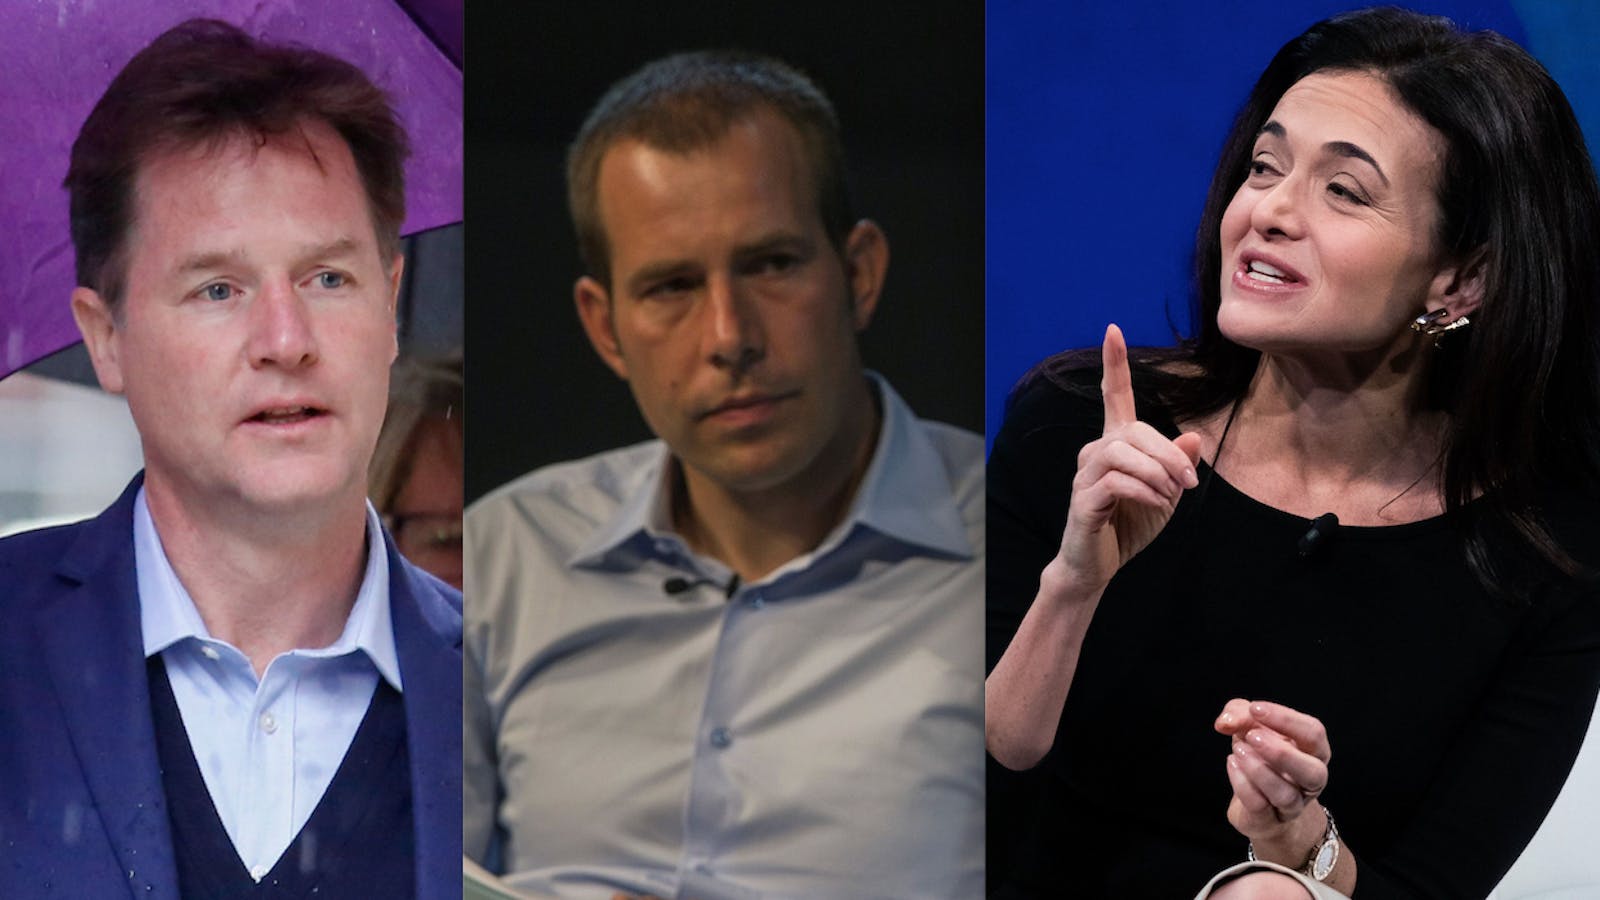 From left, Facebook policy chief Nick Clegg, incoming Chief Operating Officer Javier Olivan, and outgoing COO Sheryl Sandberg. Photos by Bloomberg